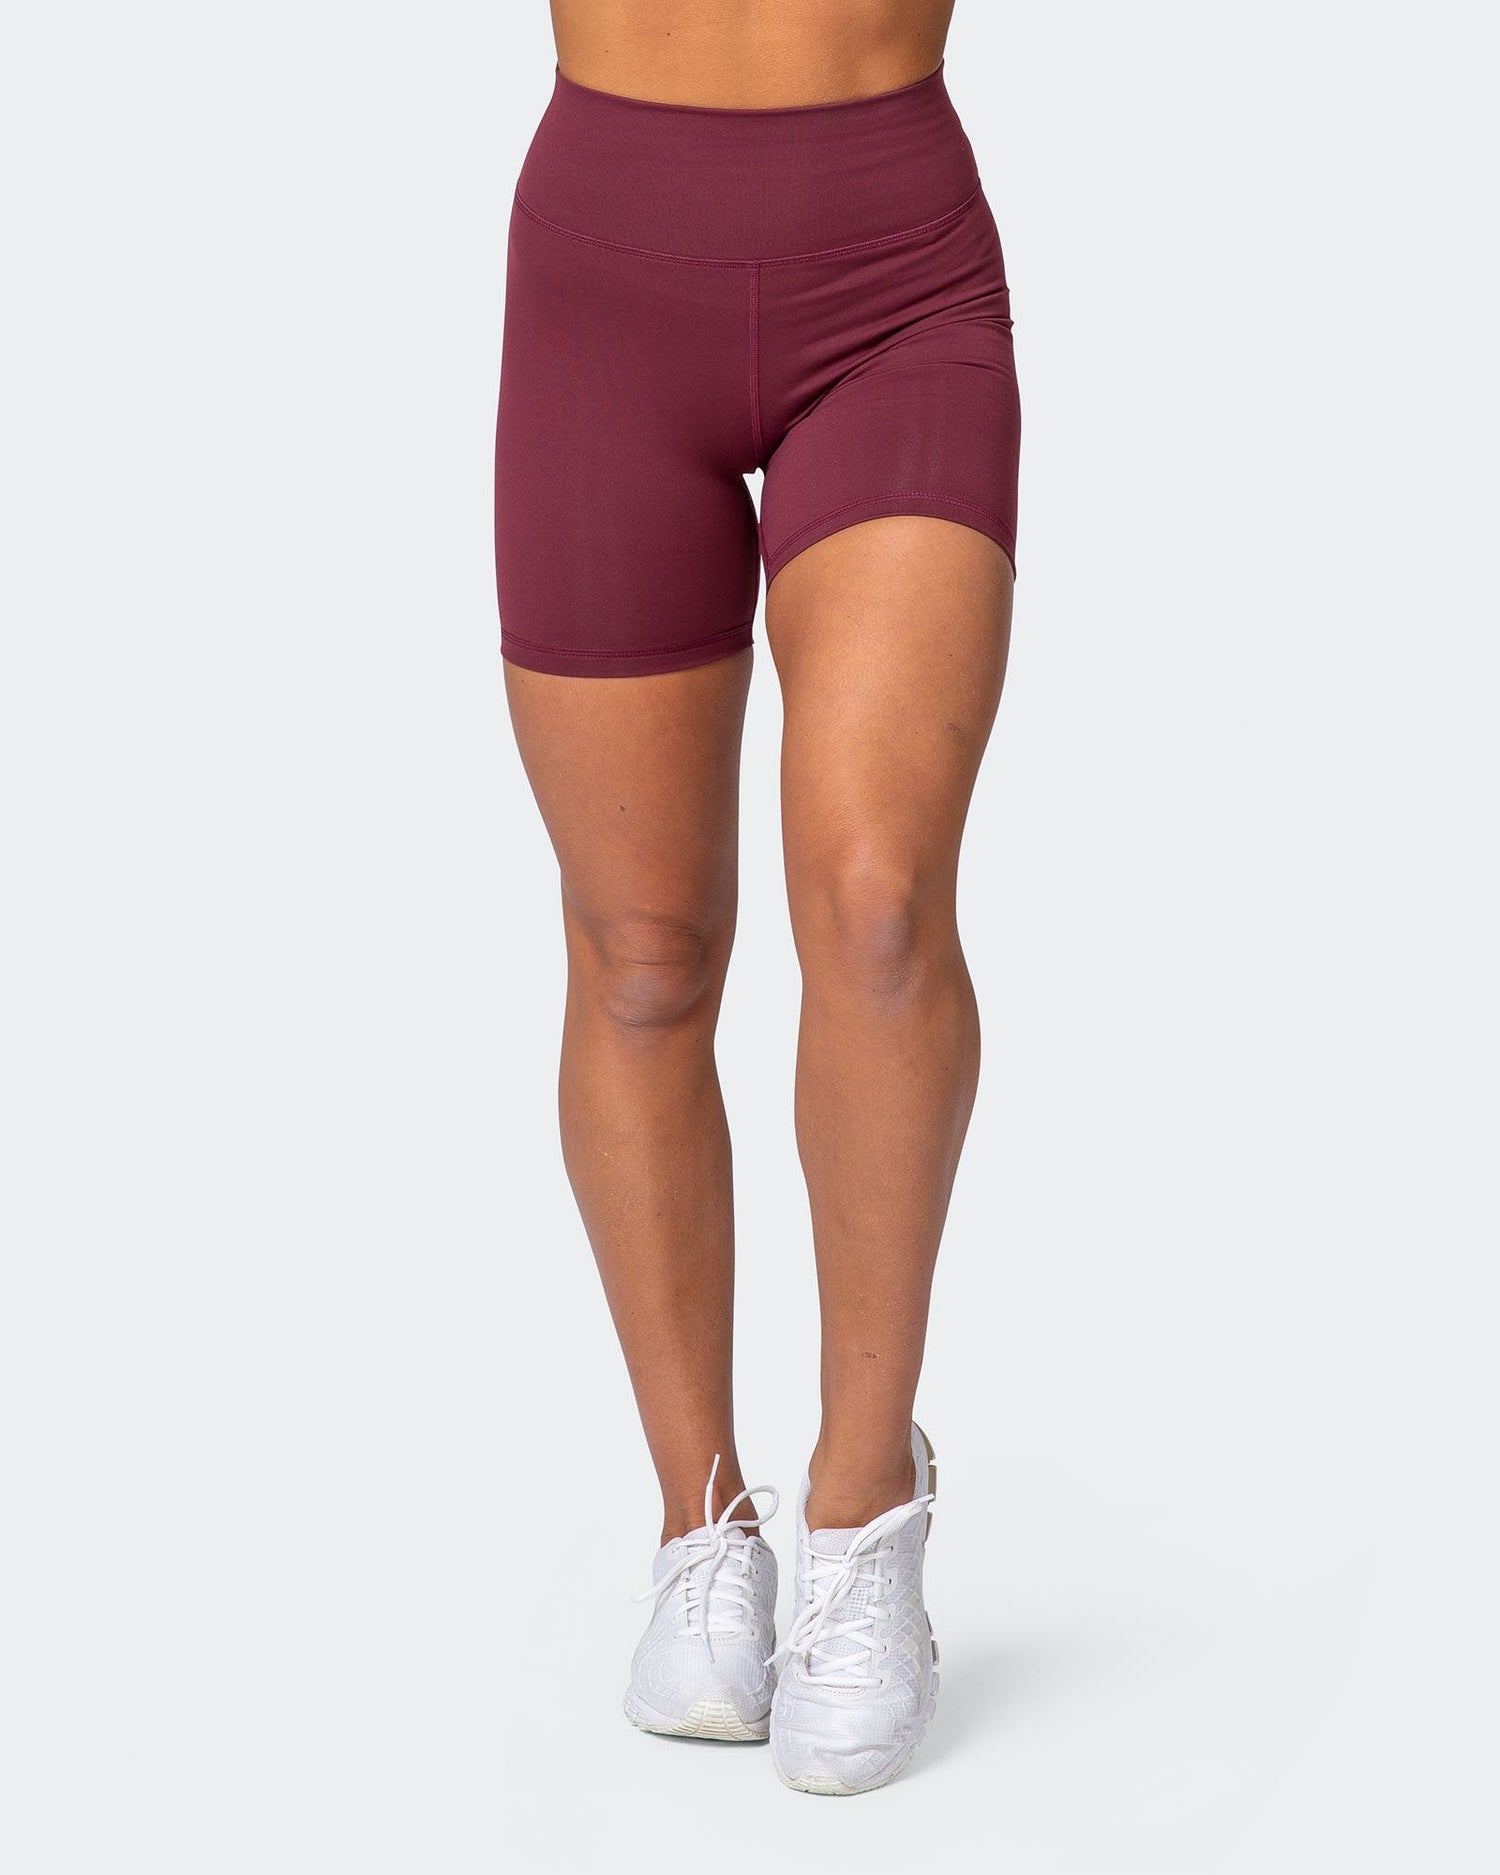 Prize Fighter Bike Shorts - Wine W/ White & Fawn